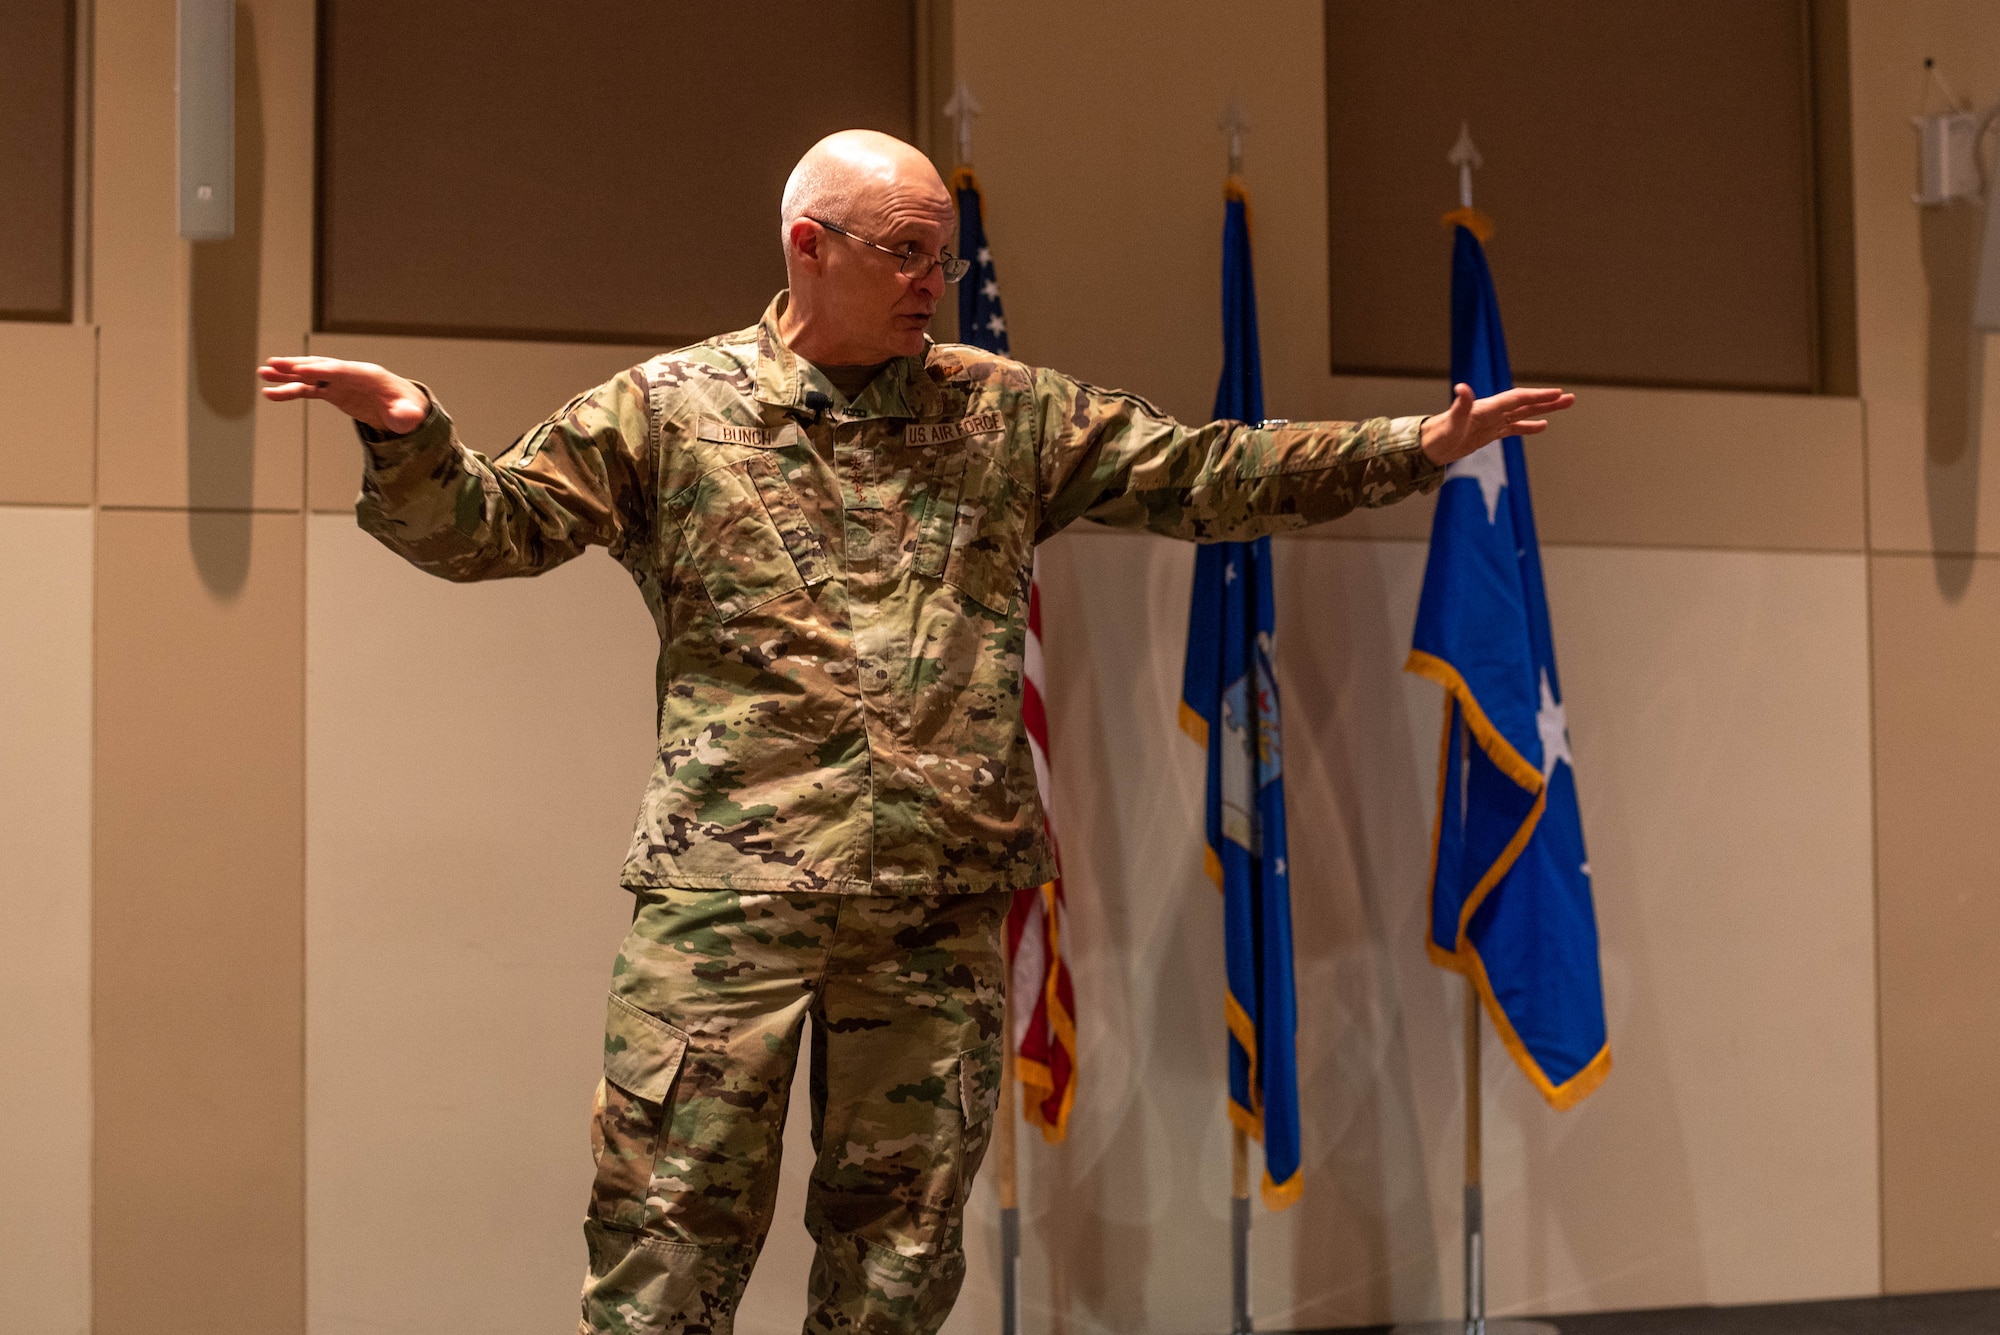 Gen. Arnold W. Bunch, Jr., Air Force Materiel Command commander, speaks to Airmen during a town hall on Buckley Space Force Base, Colo., Oct. 28, 2021. Airmen assigned to the U.S. Space Force will be supported by Air Force Materiel Command which will provide the same force development, functional and administrative support for Airmen working at Space Force installations as they currently provide to AFMC Airmen. (U.S. Space Force photo by Airman 1st Class Shaun Combs)